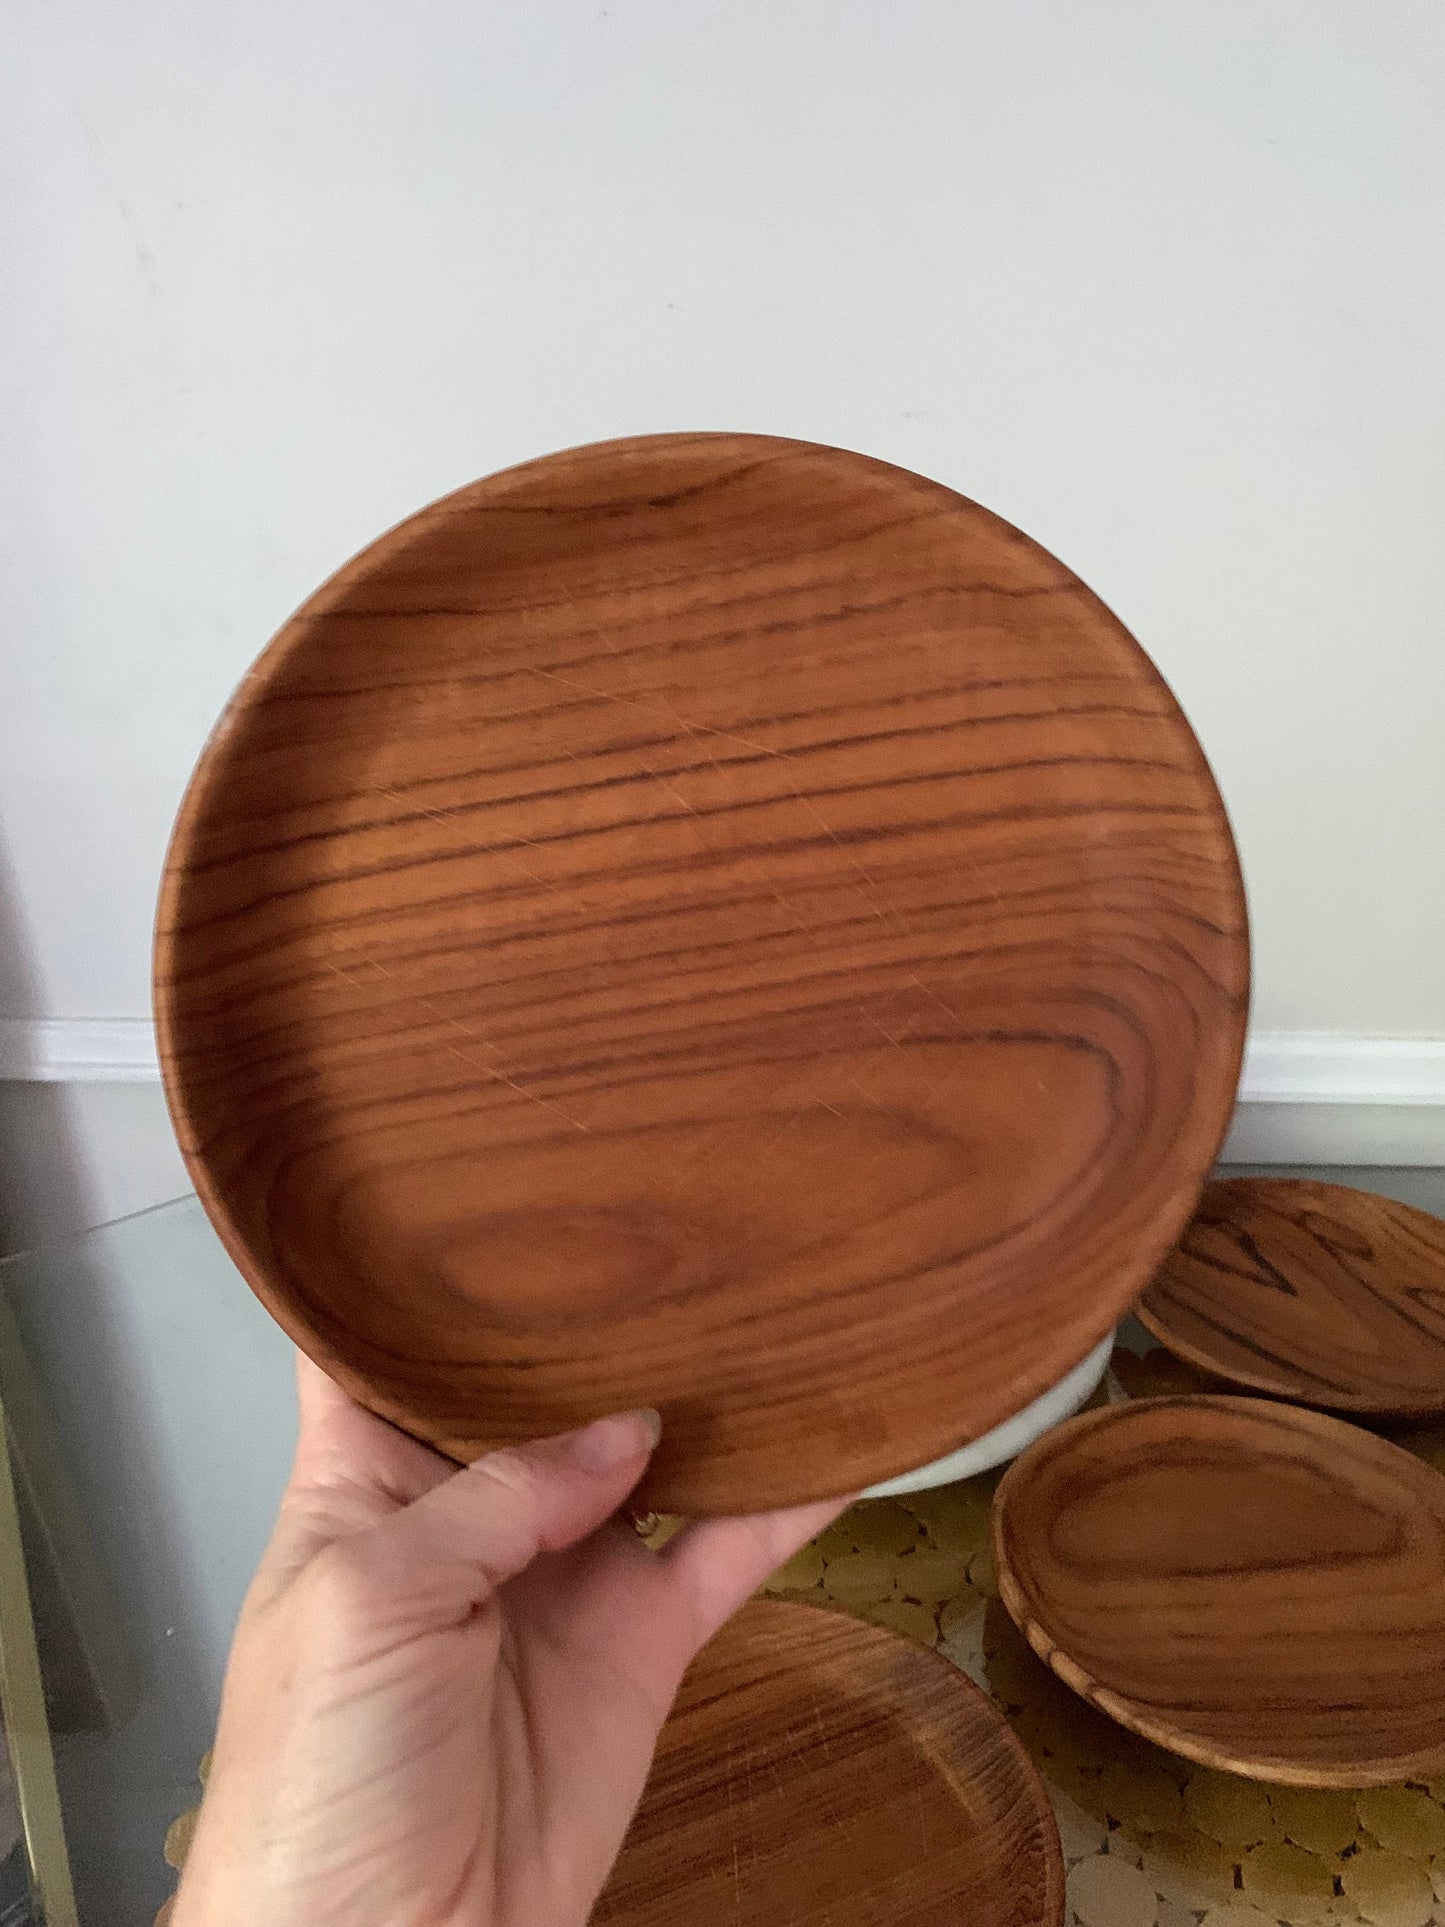 Retro 5 Piece Teak Wooden Salad Bowl and Plate Set with Tongs